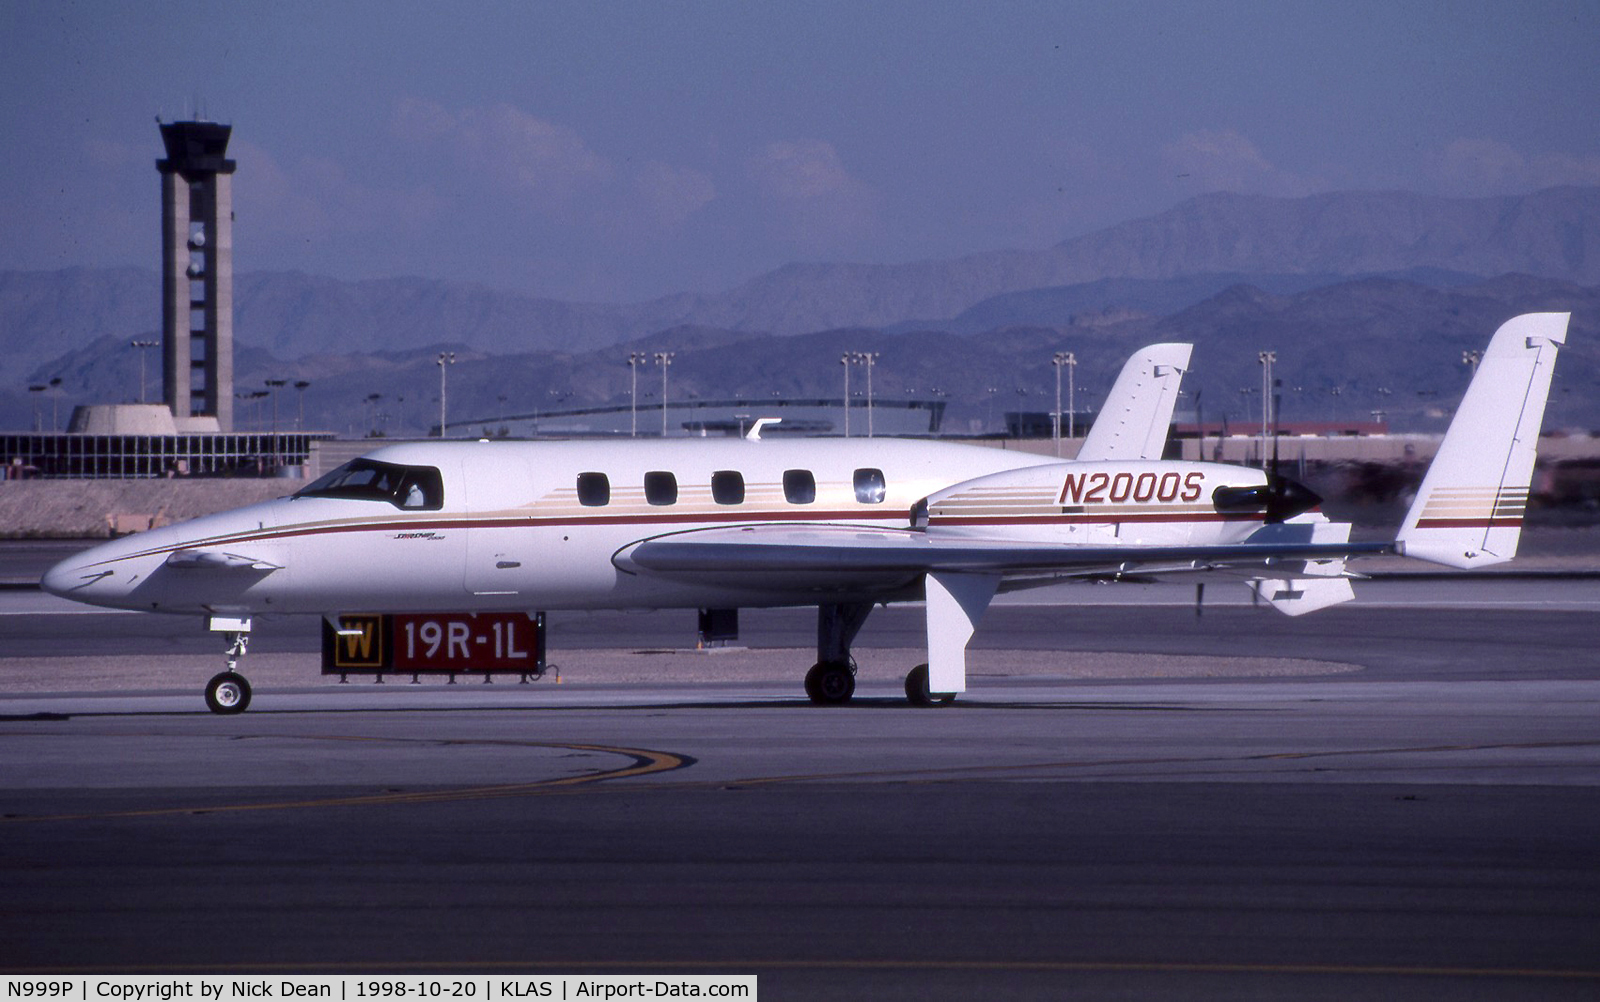 N999P, 1993 Beech 2000A Starship 1 Starship 1 C/N NC-43, KLAS (This Starship is seen as N2000S one of 2 frames that carried this reg NC-1 was the first and the second seen here is C/N NC-43 previously registered N999P)